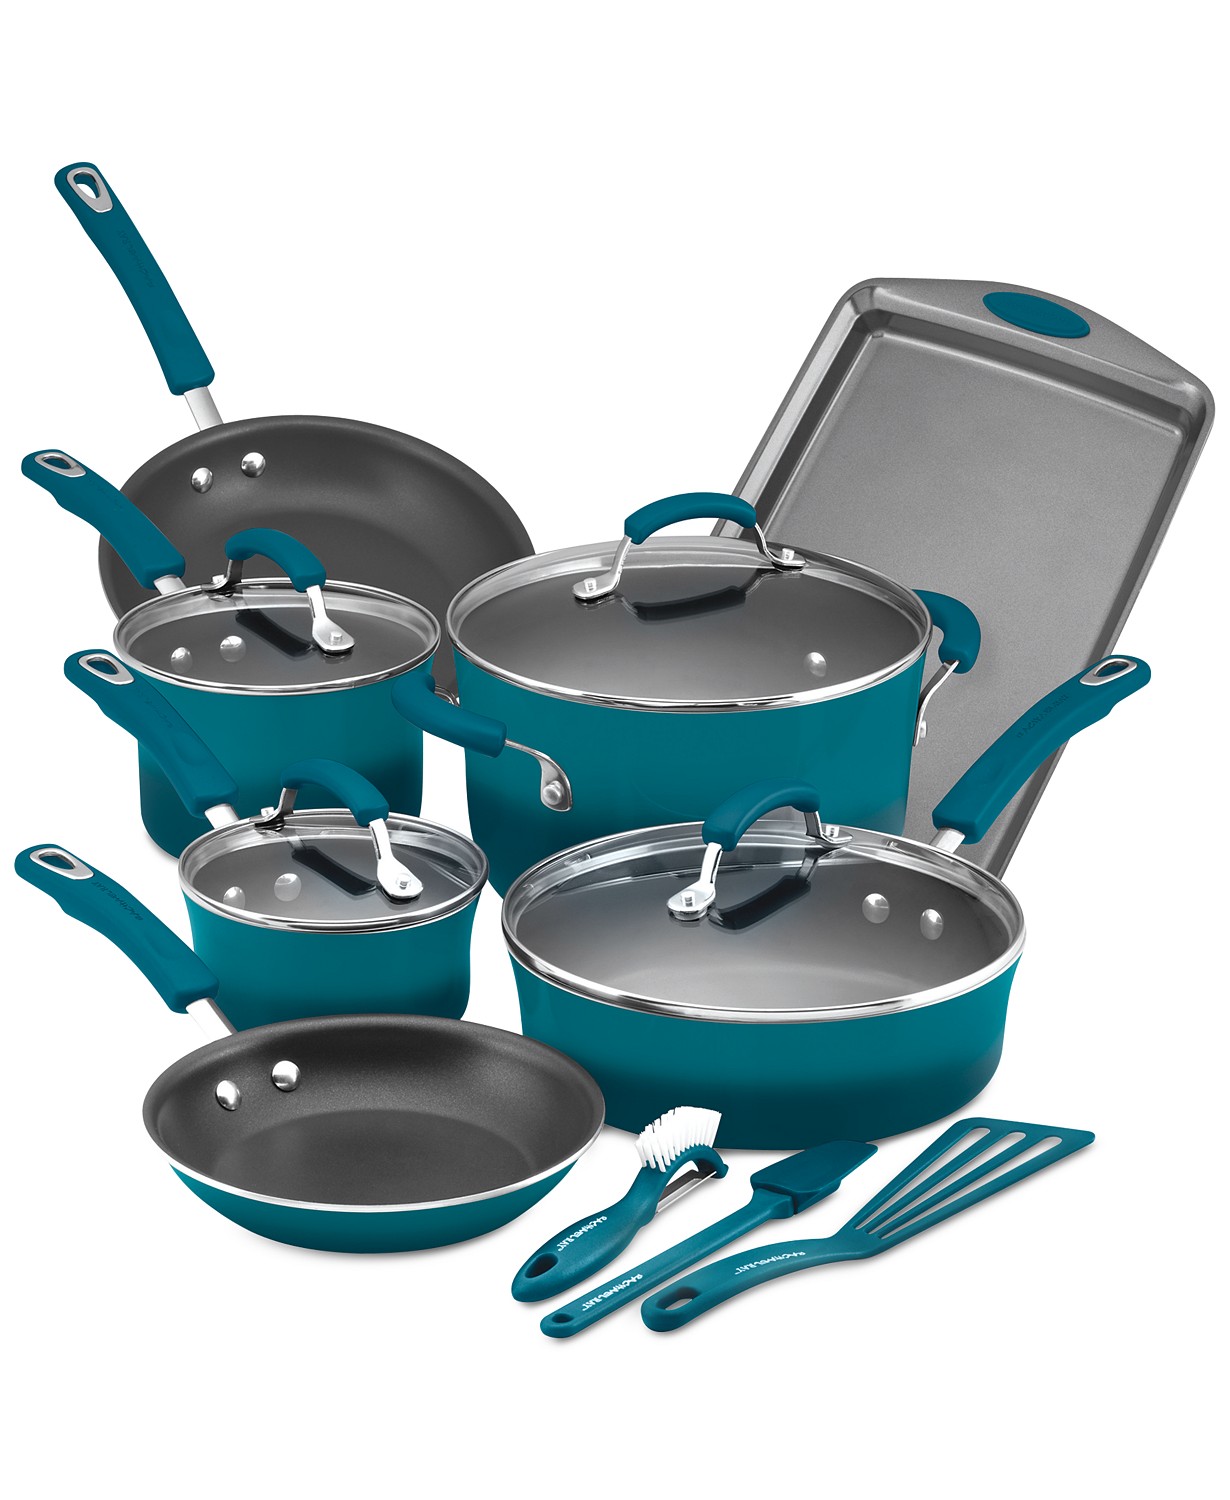 hot-early-black-friday-special-macy-s-rachael-ray-14-pc-nonstick